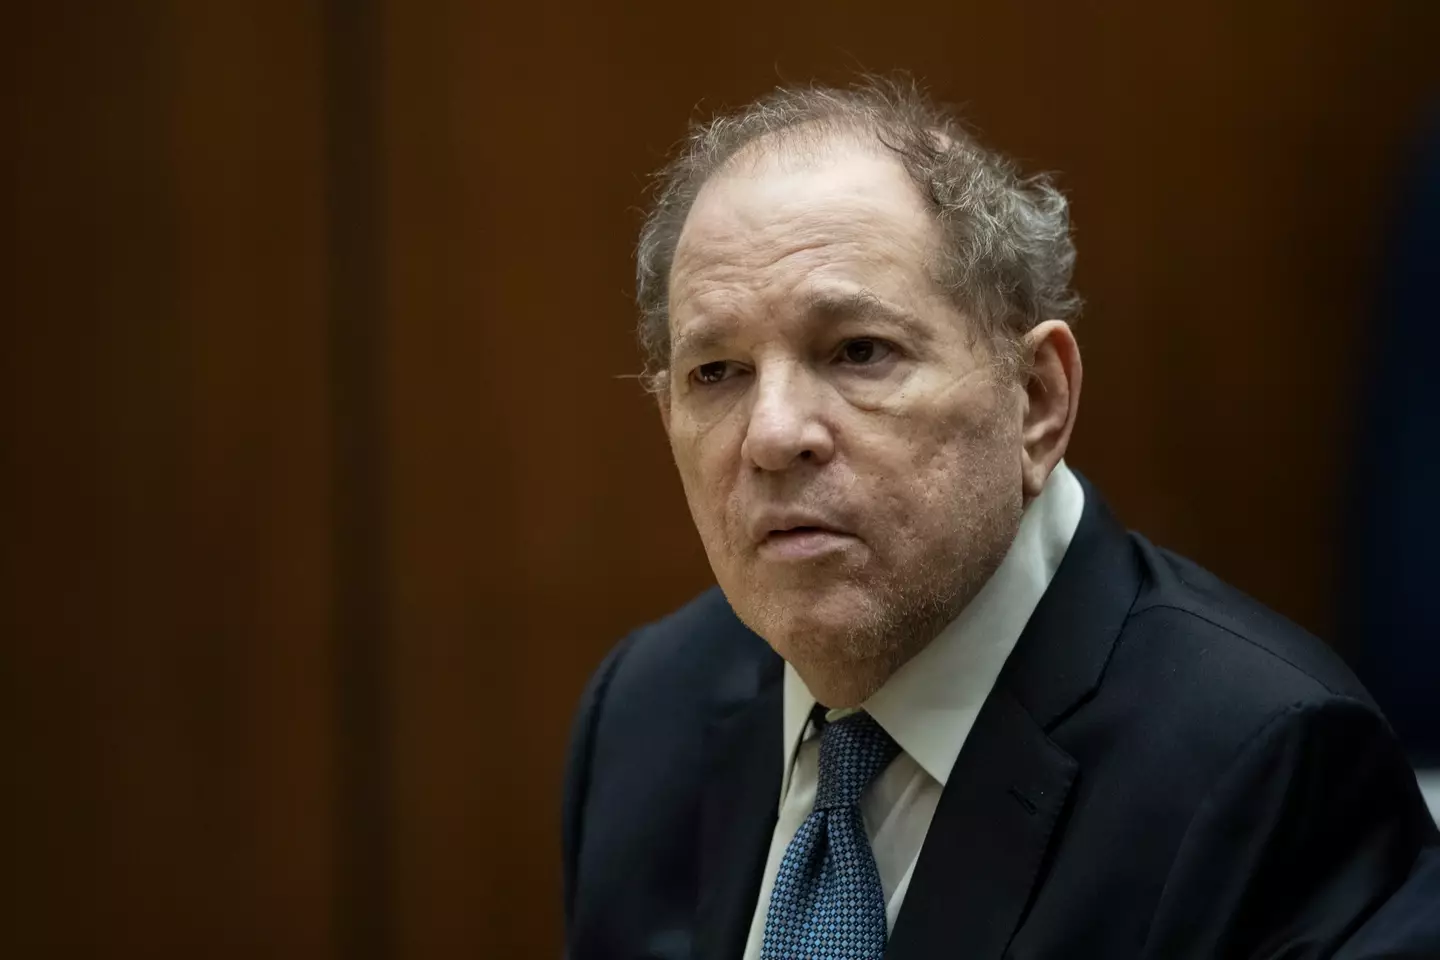 The court has overturned Weinstein's rape conviction. (Etienne Laurent-Pool/Getty Images)